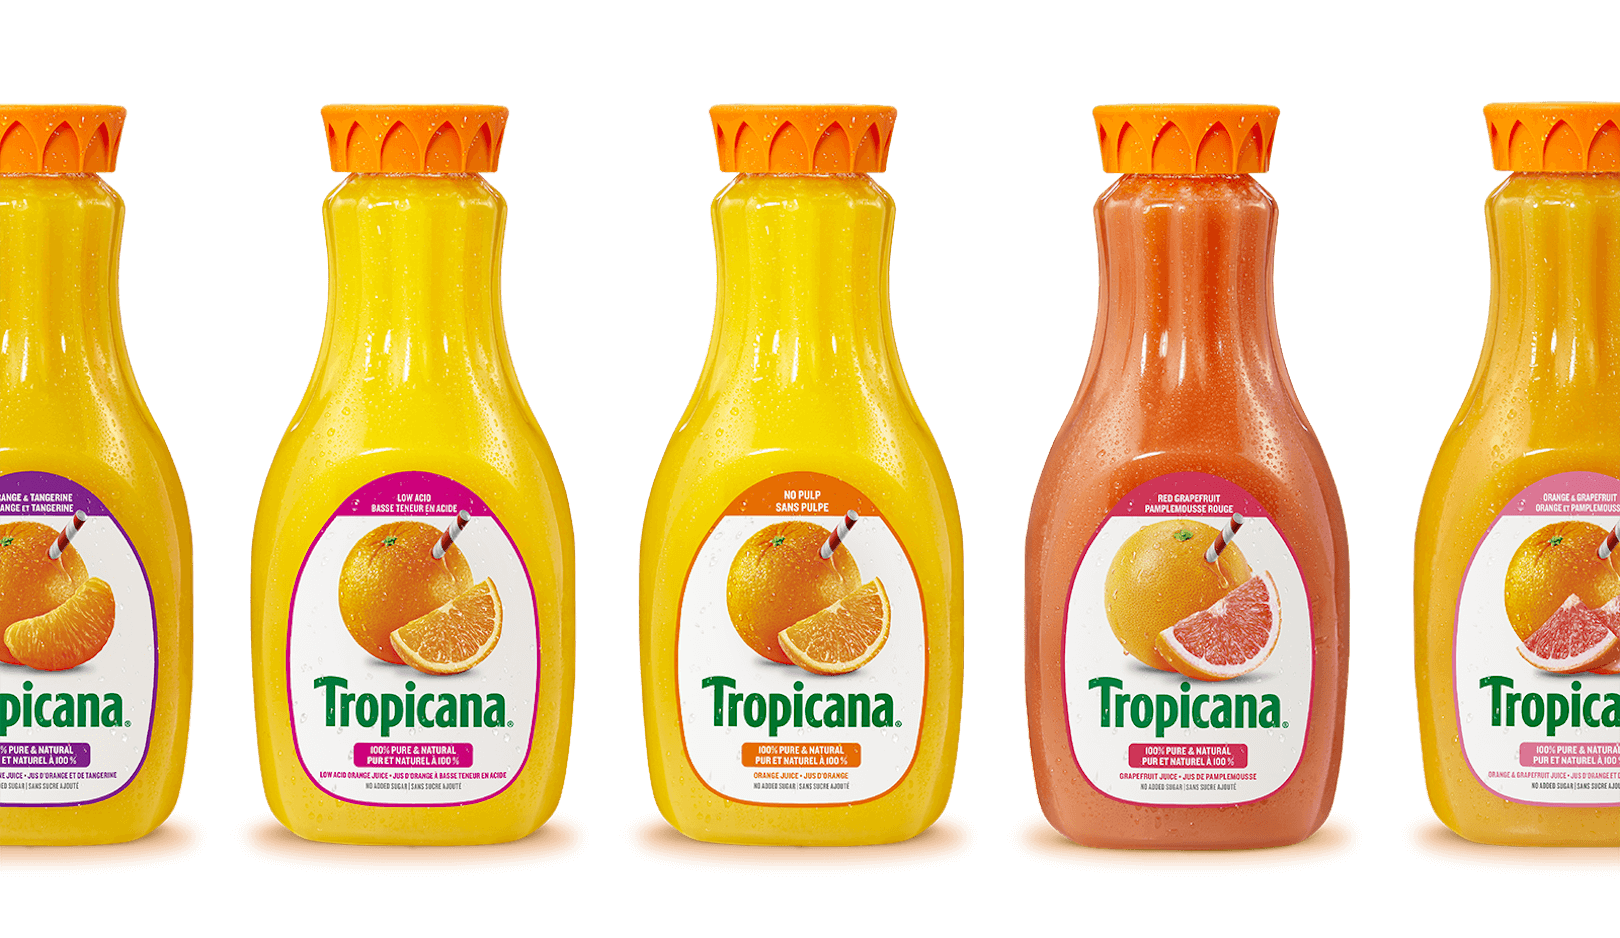 Tropicana Juice lineup with all the juices